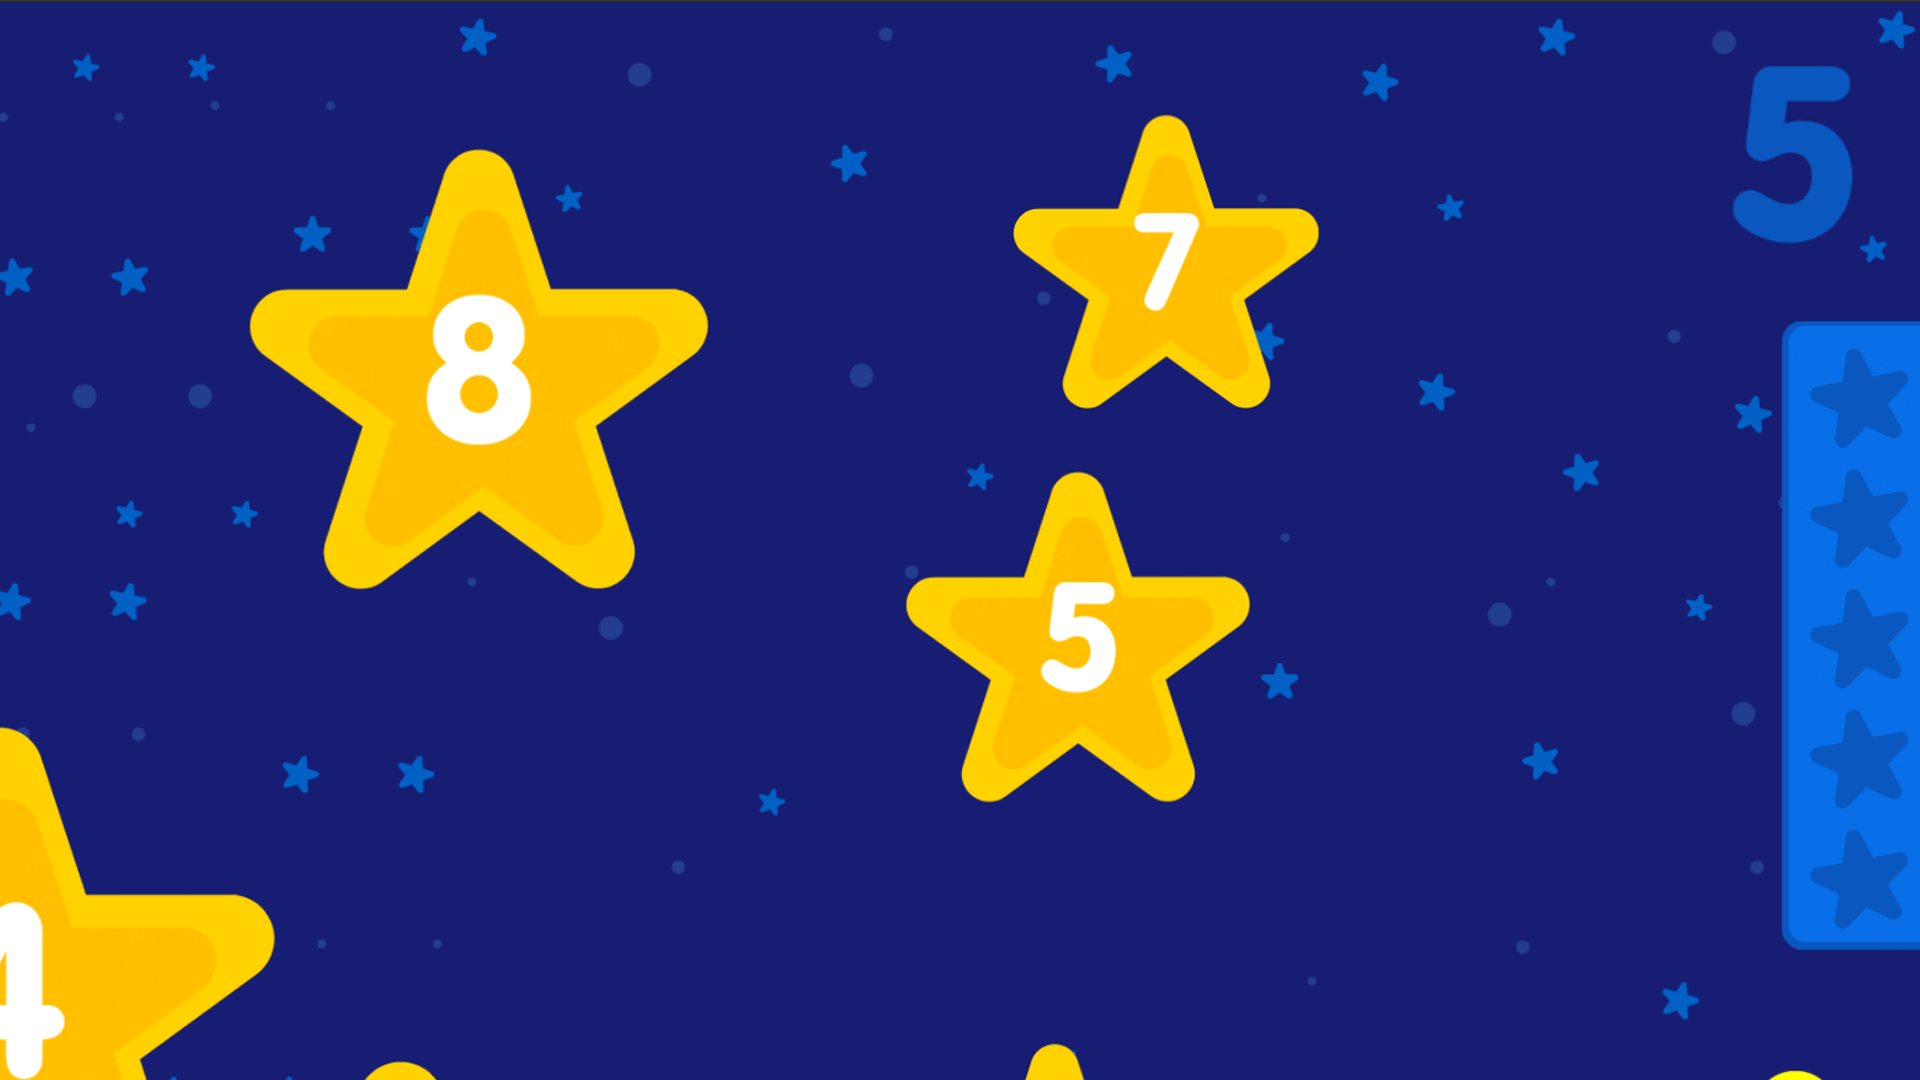 learn shapes, learn letters, learn numbers, game for toddlers, game for preschooler, catch a falling star